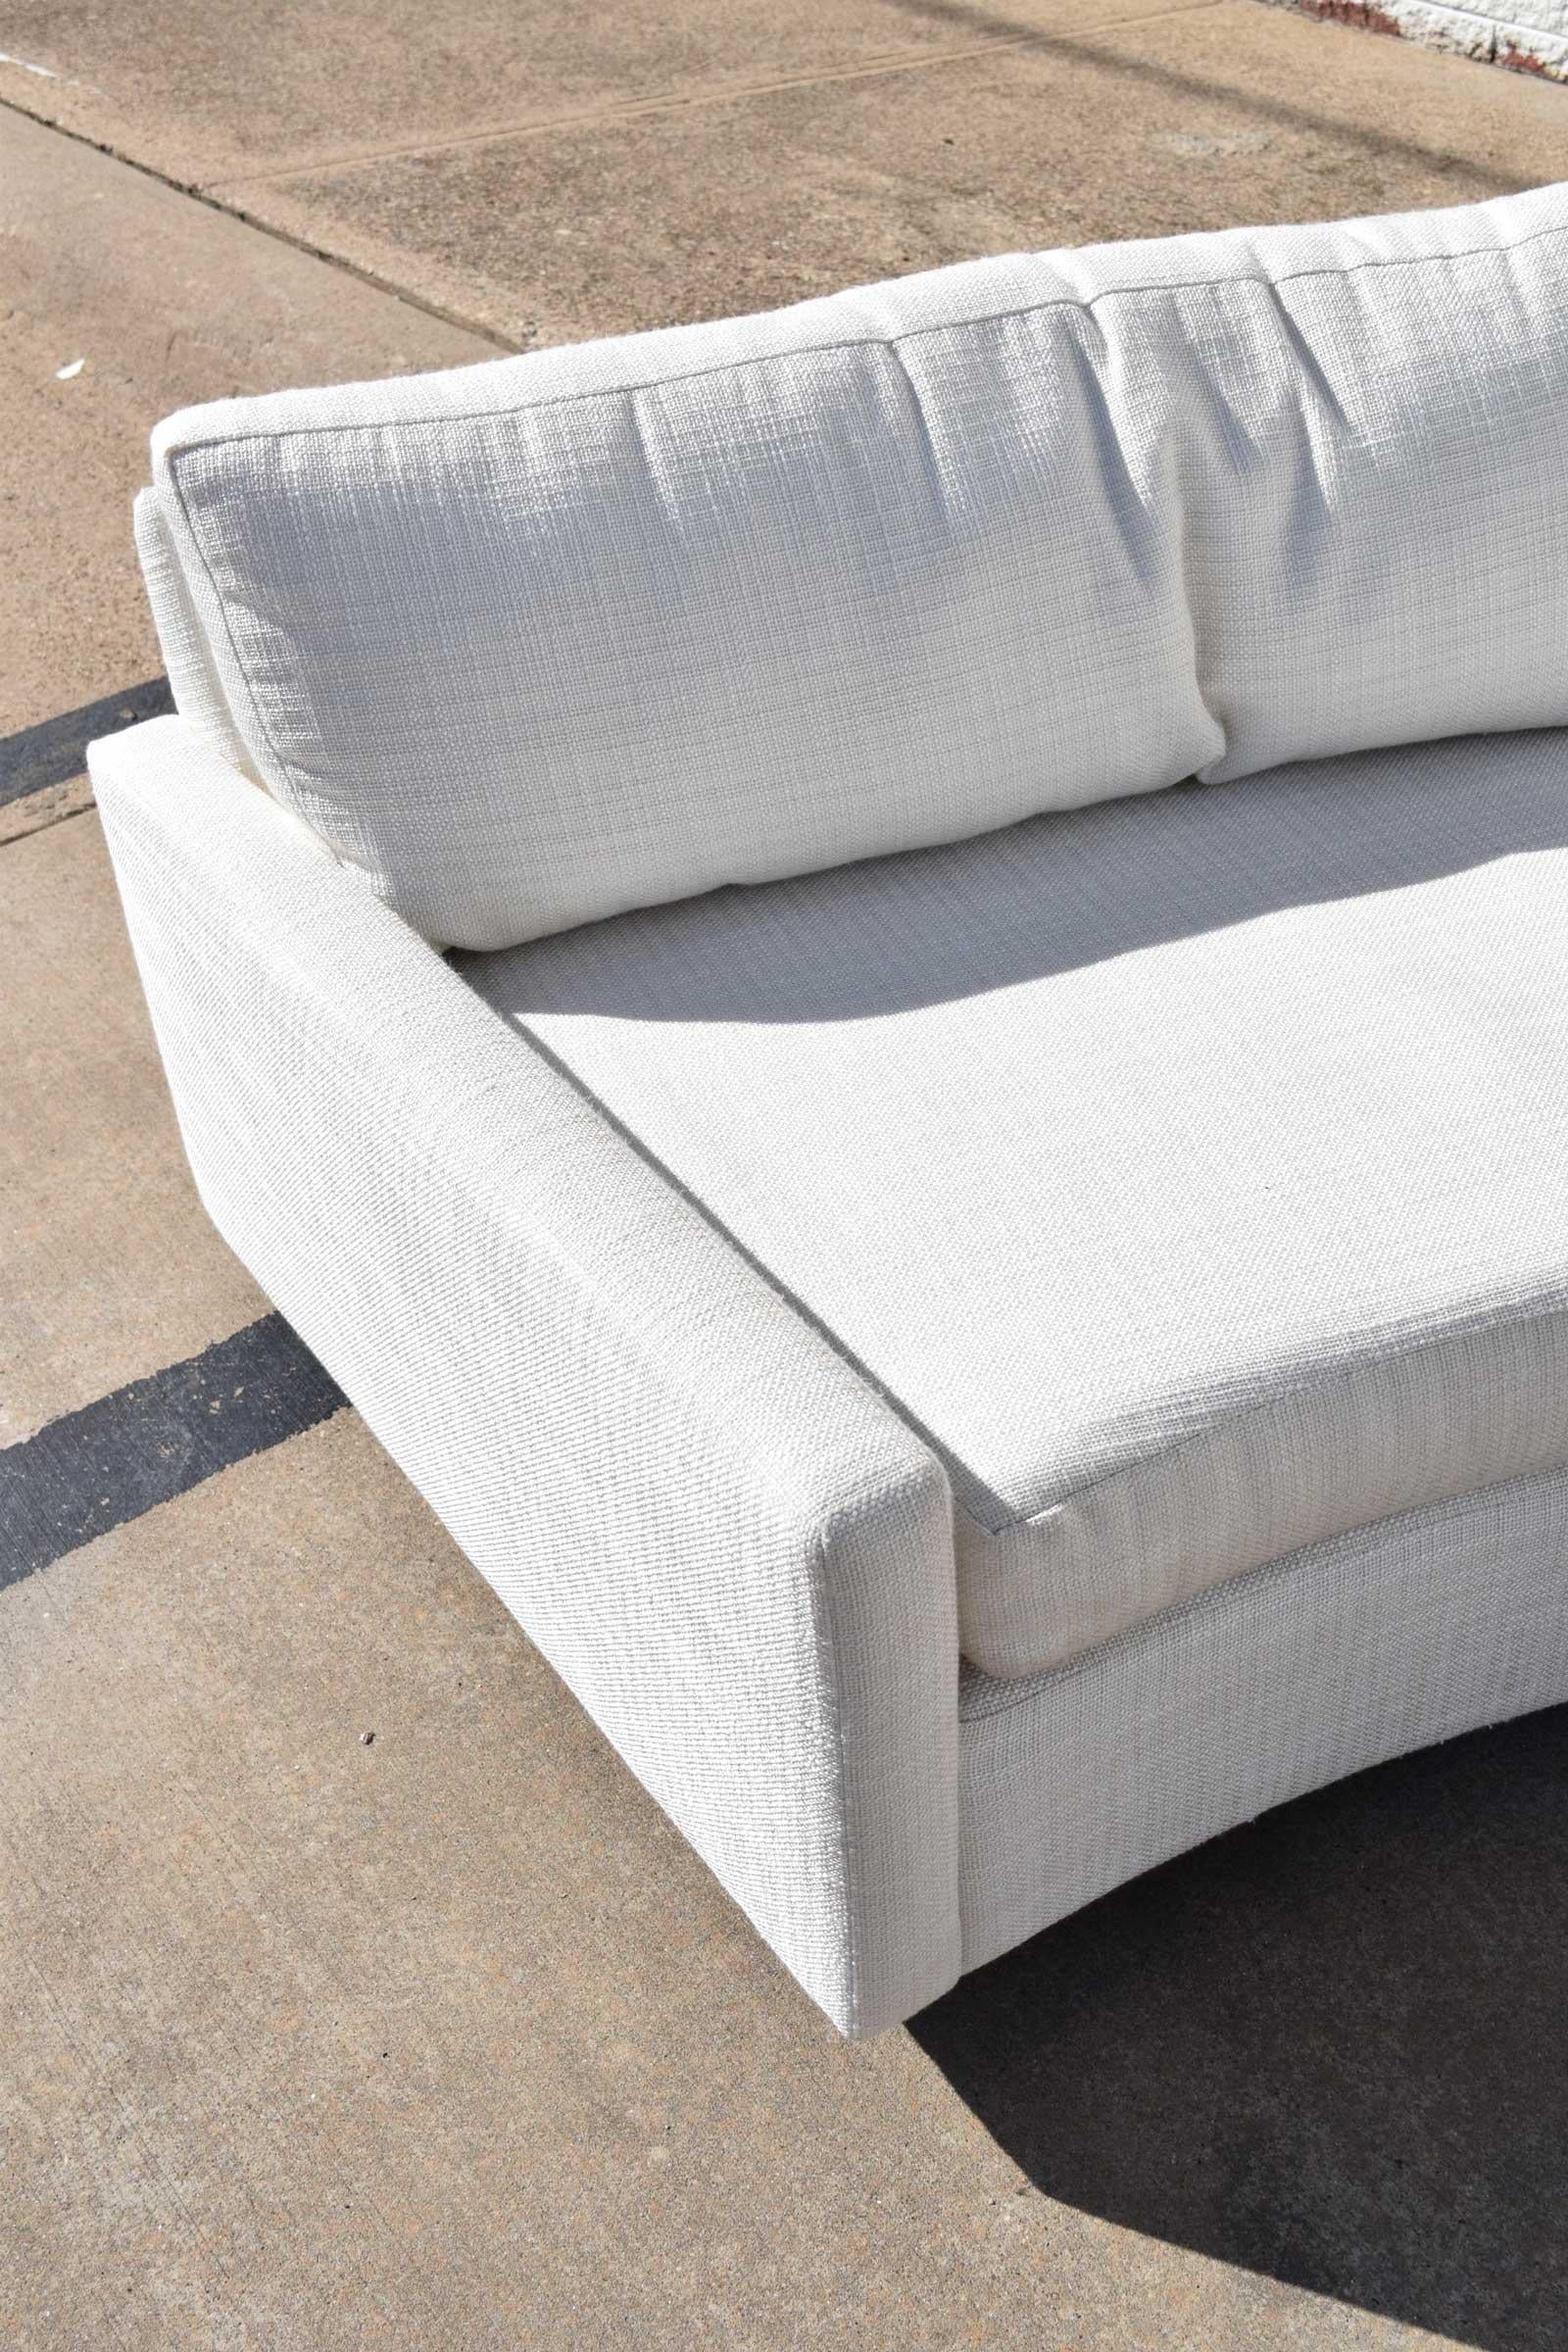 Milo Baughman Curved Sectional in White Woven Fabric 1